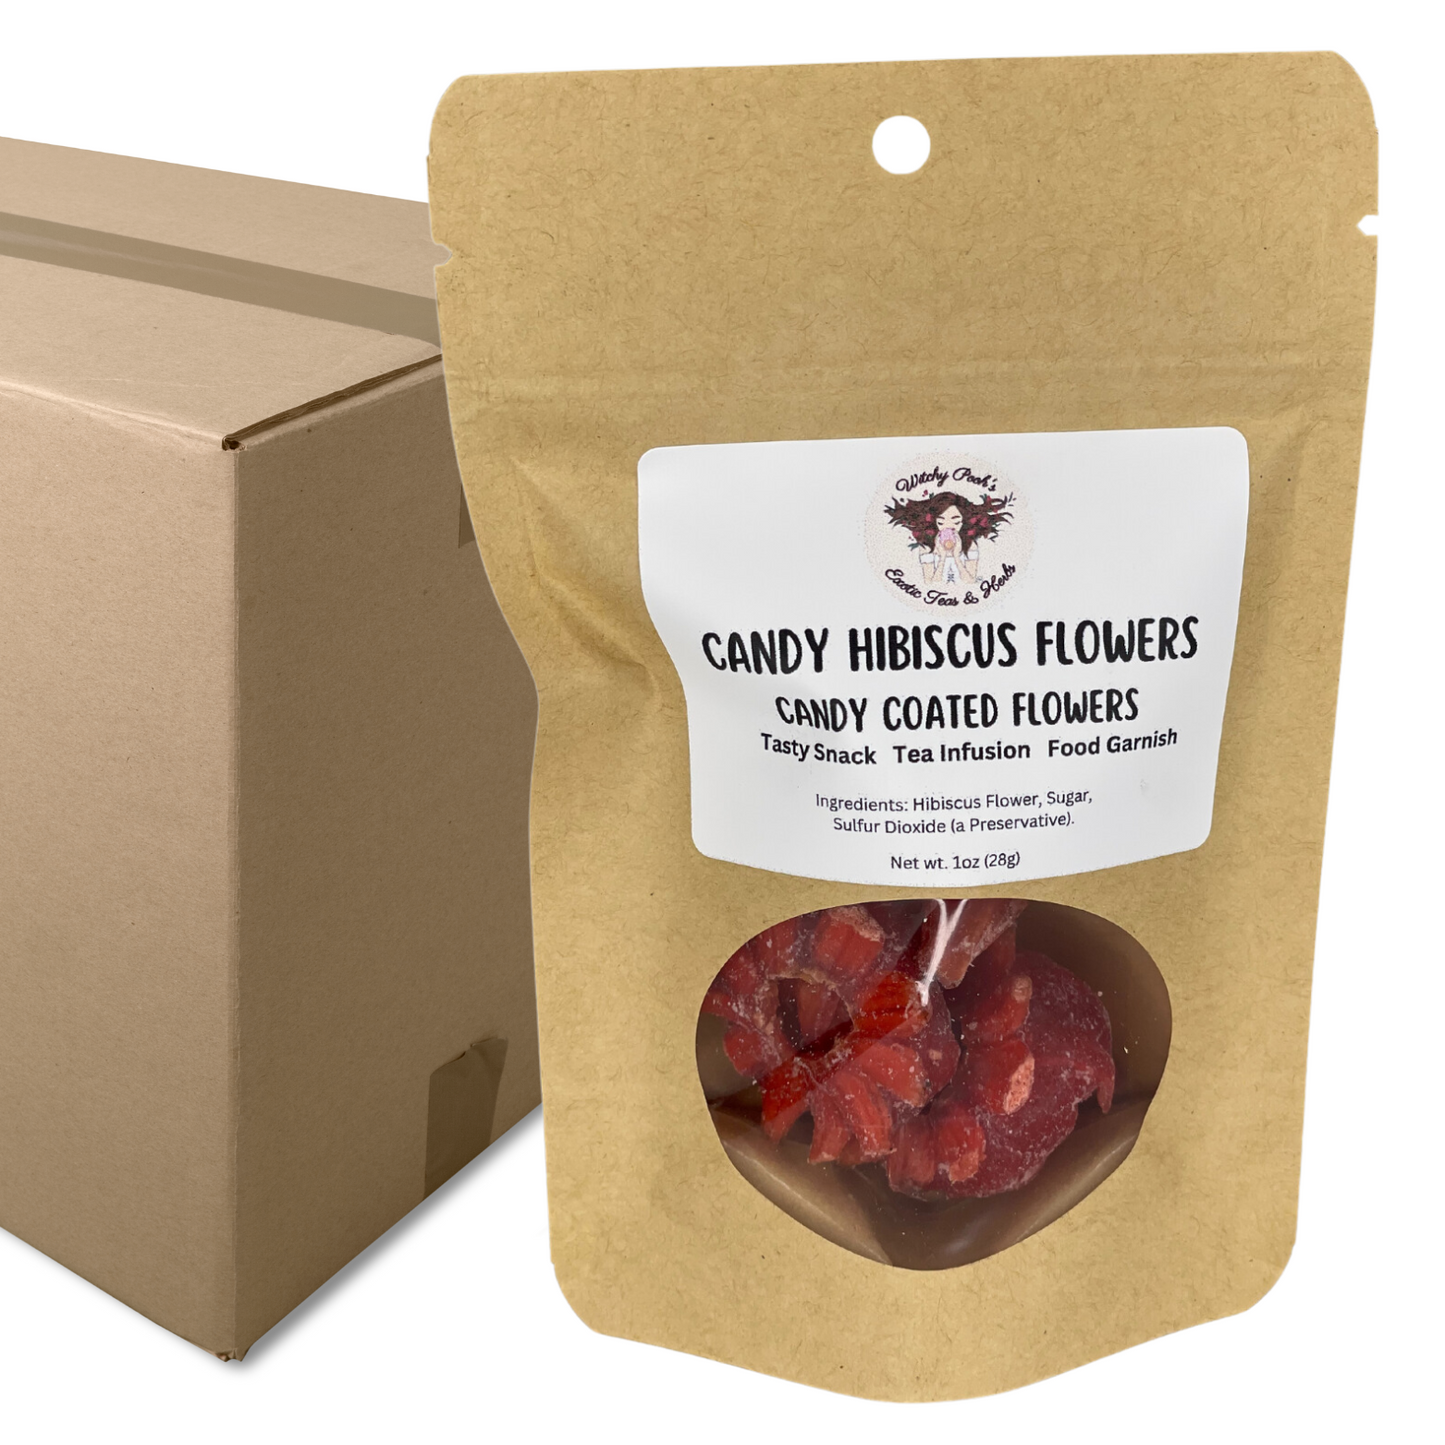 Witchy Pooh's Candy Hibiscus Flowers, Sweet Candy Coated Whole Bright Red Hibiscus Flowers, Addicting Snack!